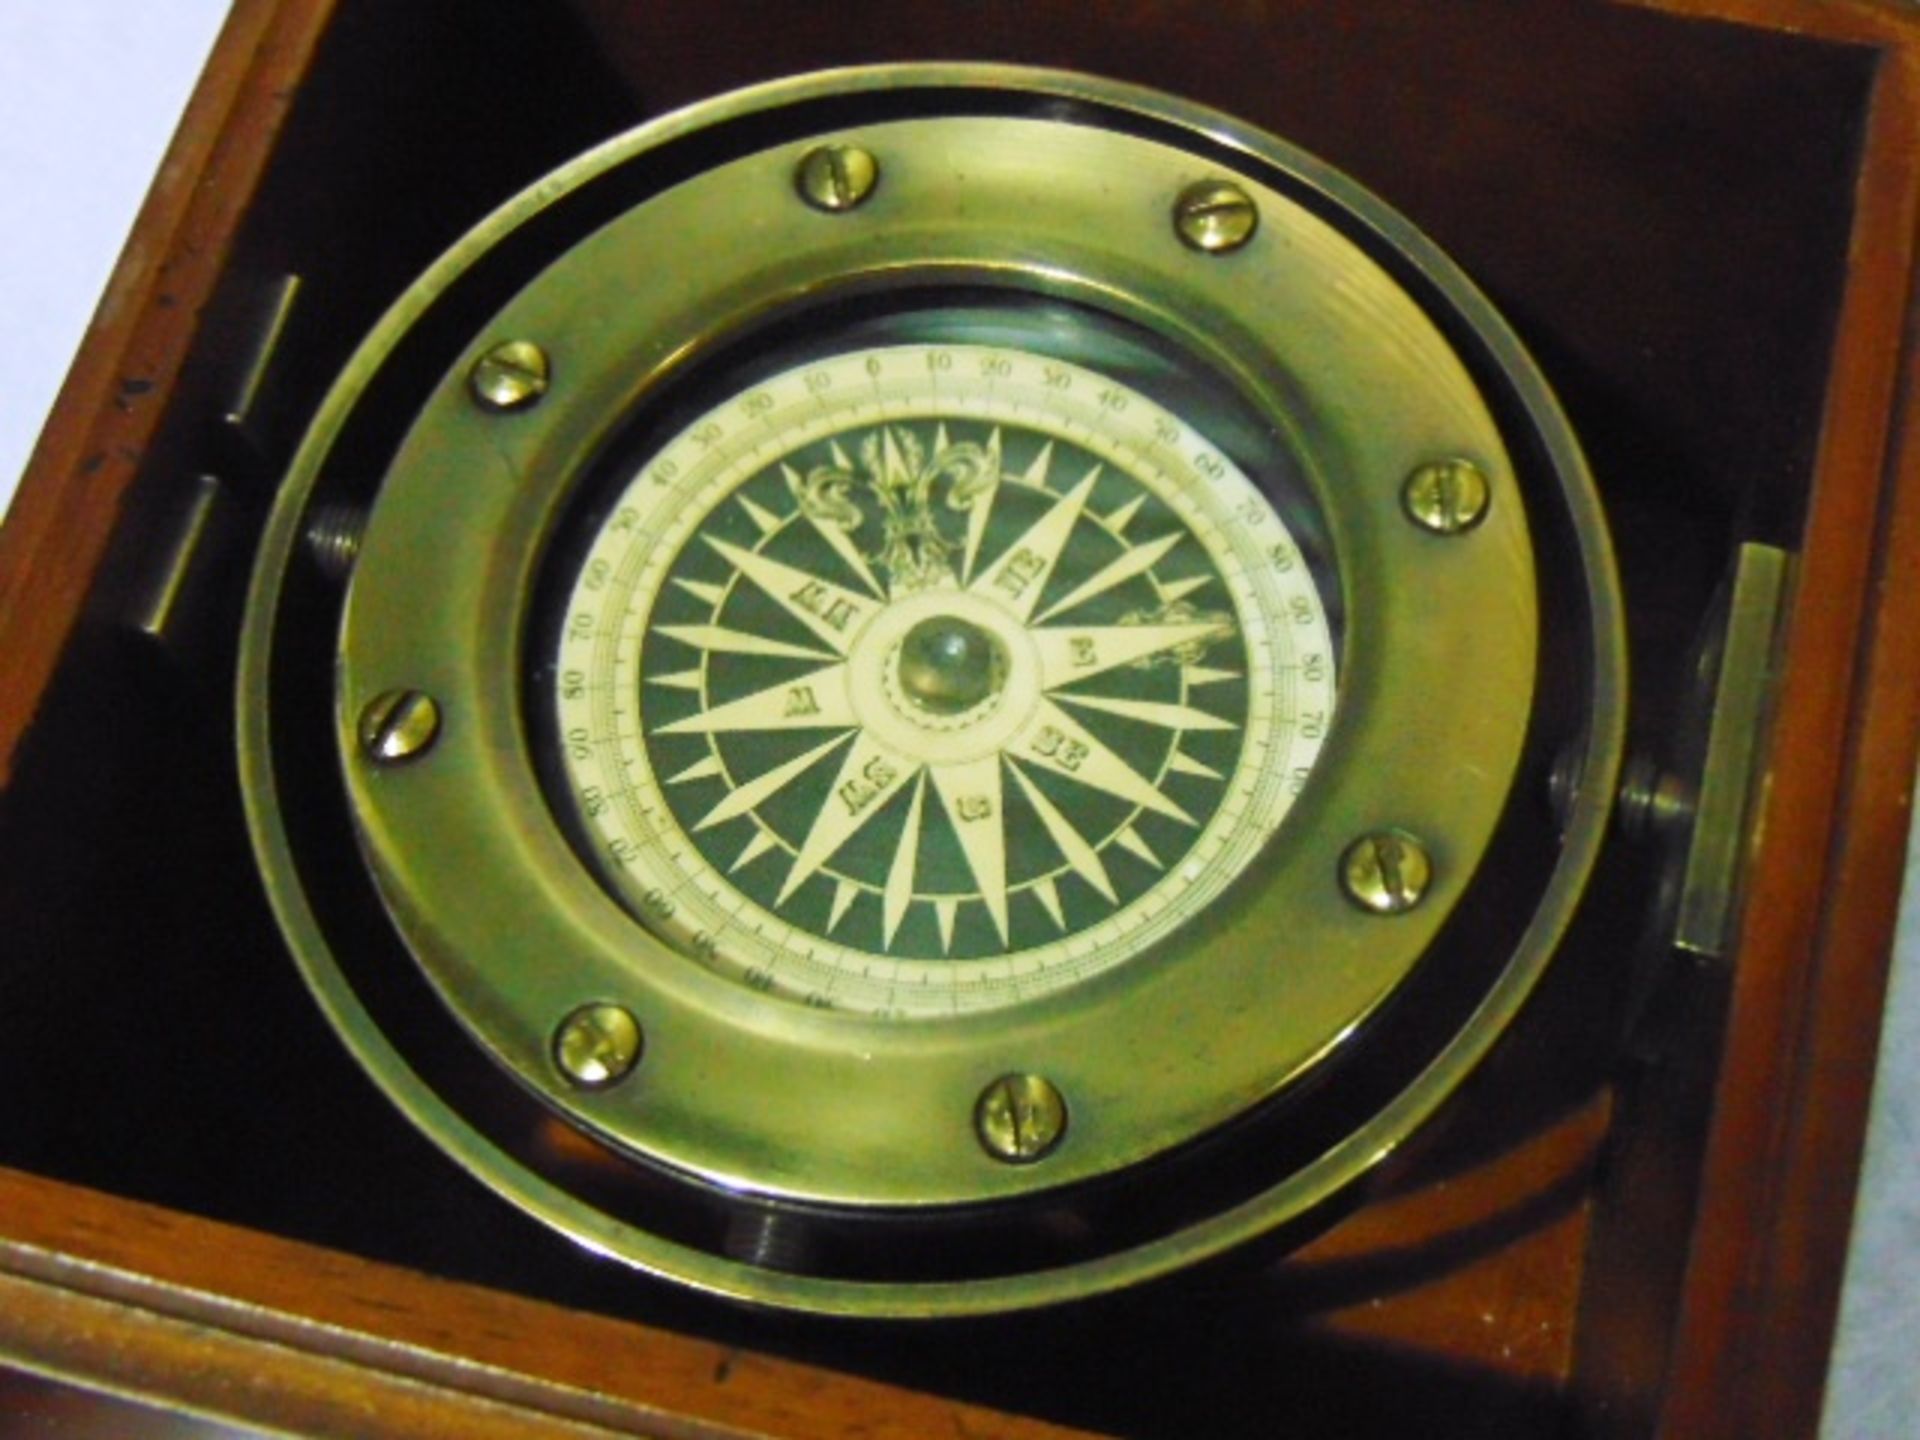 Solid Bronze Gimbaled Lifeboat Compass in Wood Box - Image 2 of 5